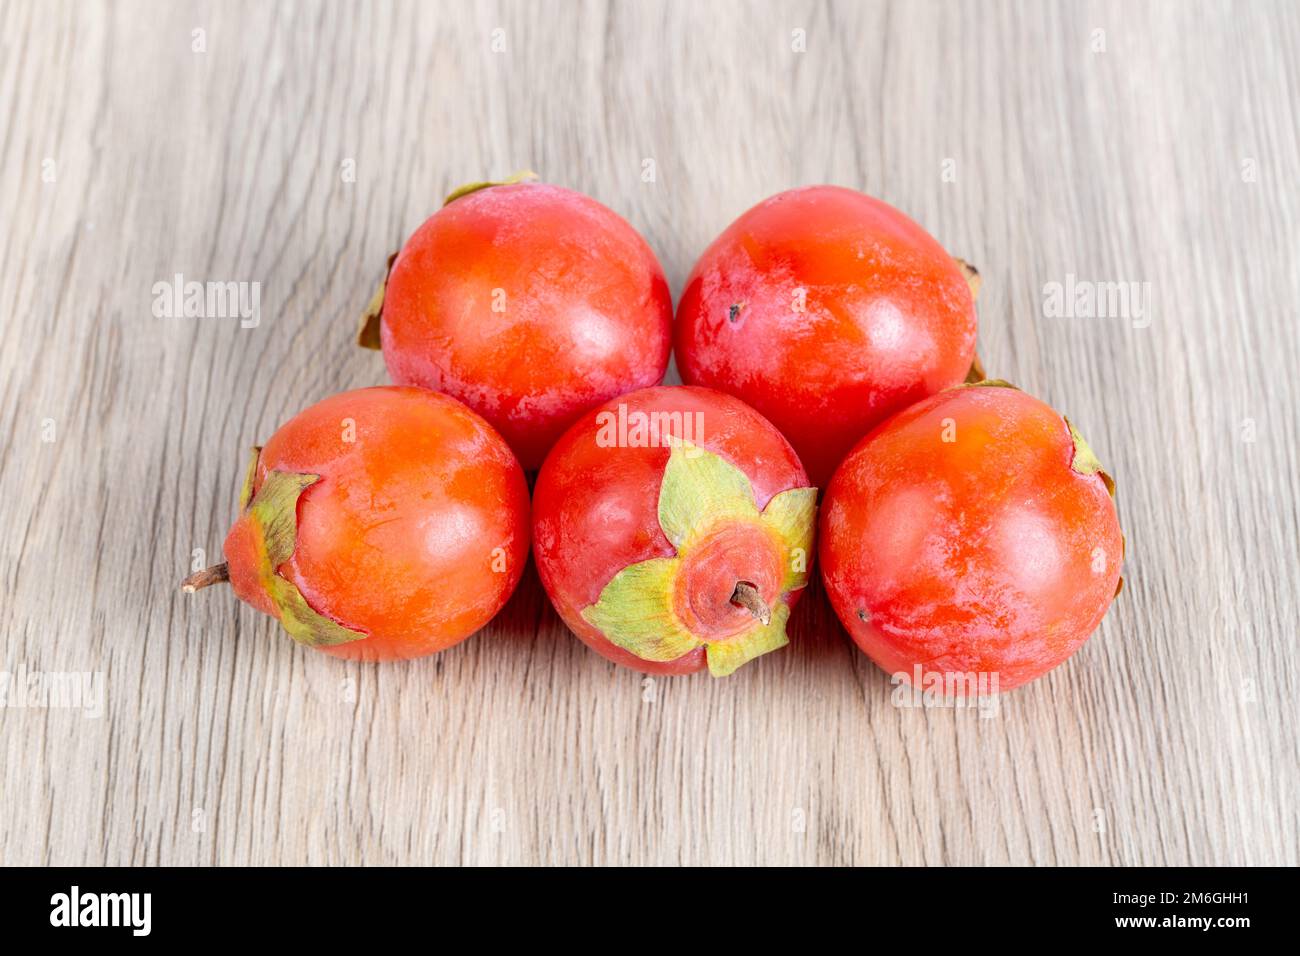 Ripe persimmon fruits isolated Stock Photo